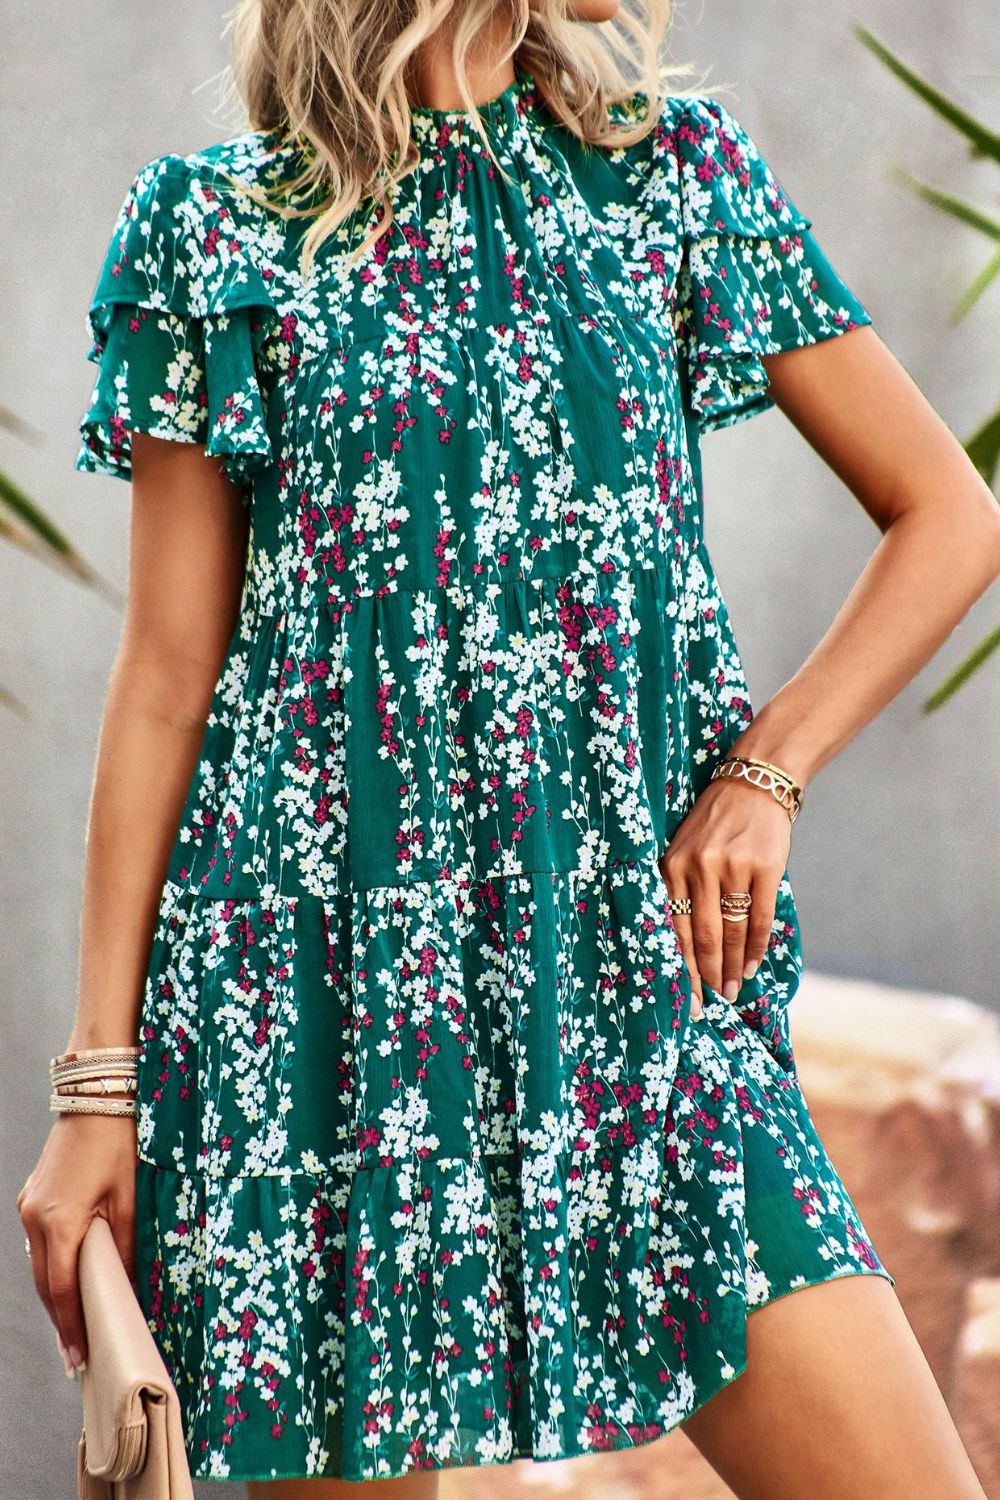 Summer Chic: Floral Layered Flutter Sleeve Dress - Perfect for Beach Weddings and Party Attire